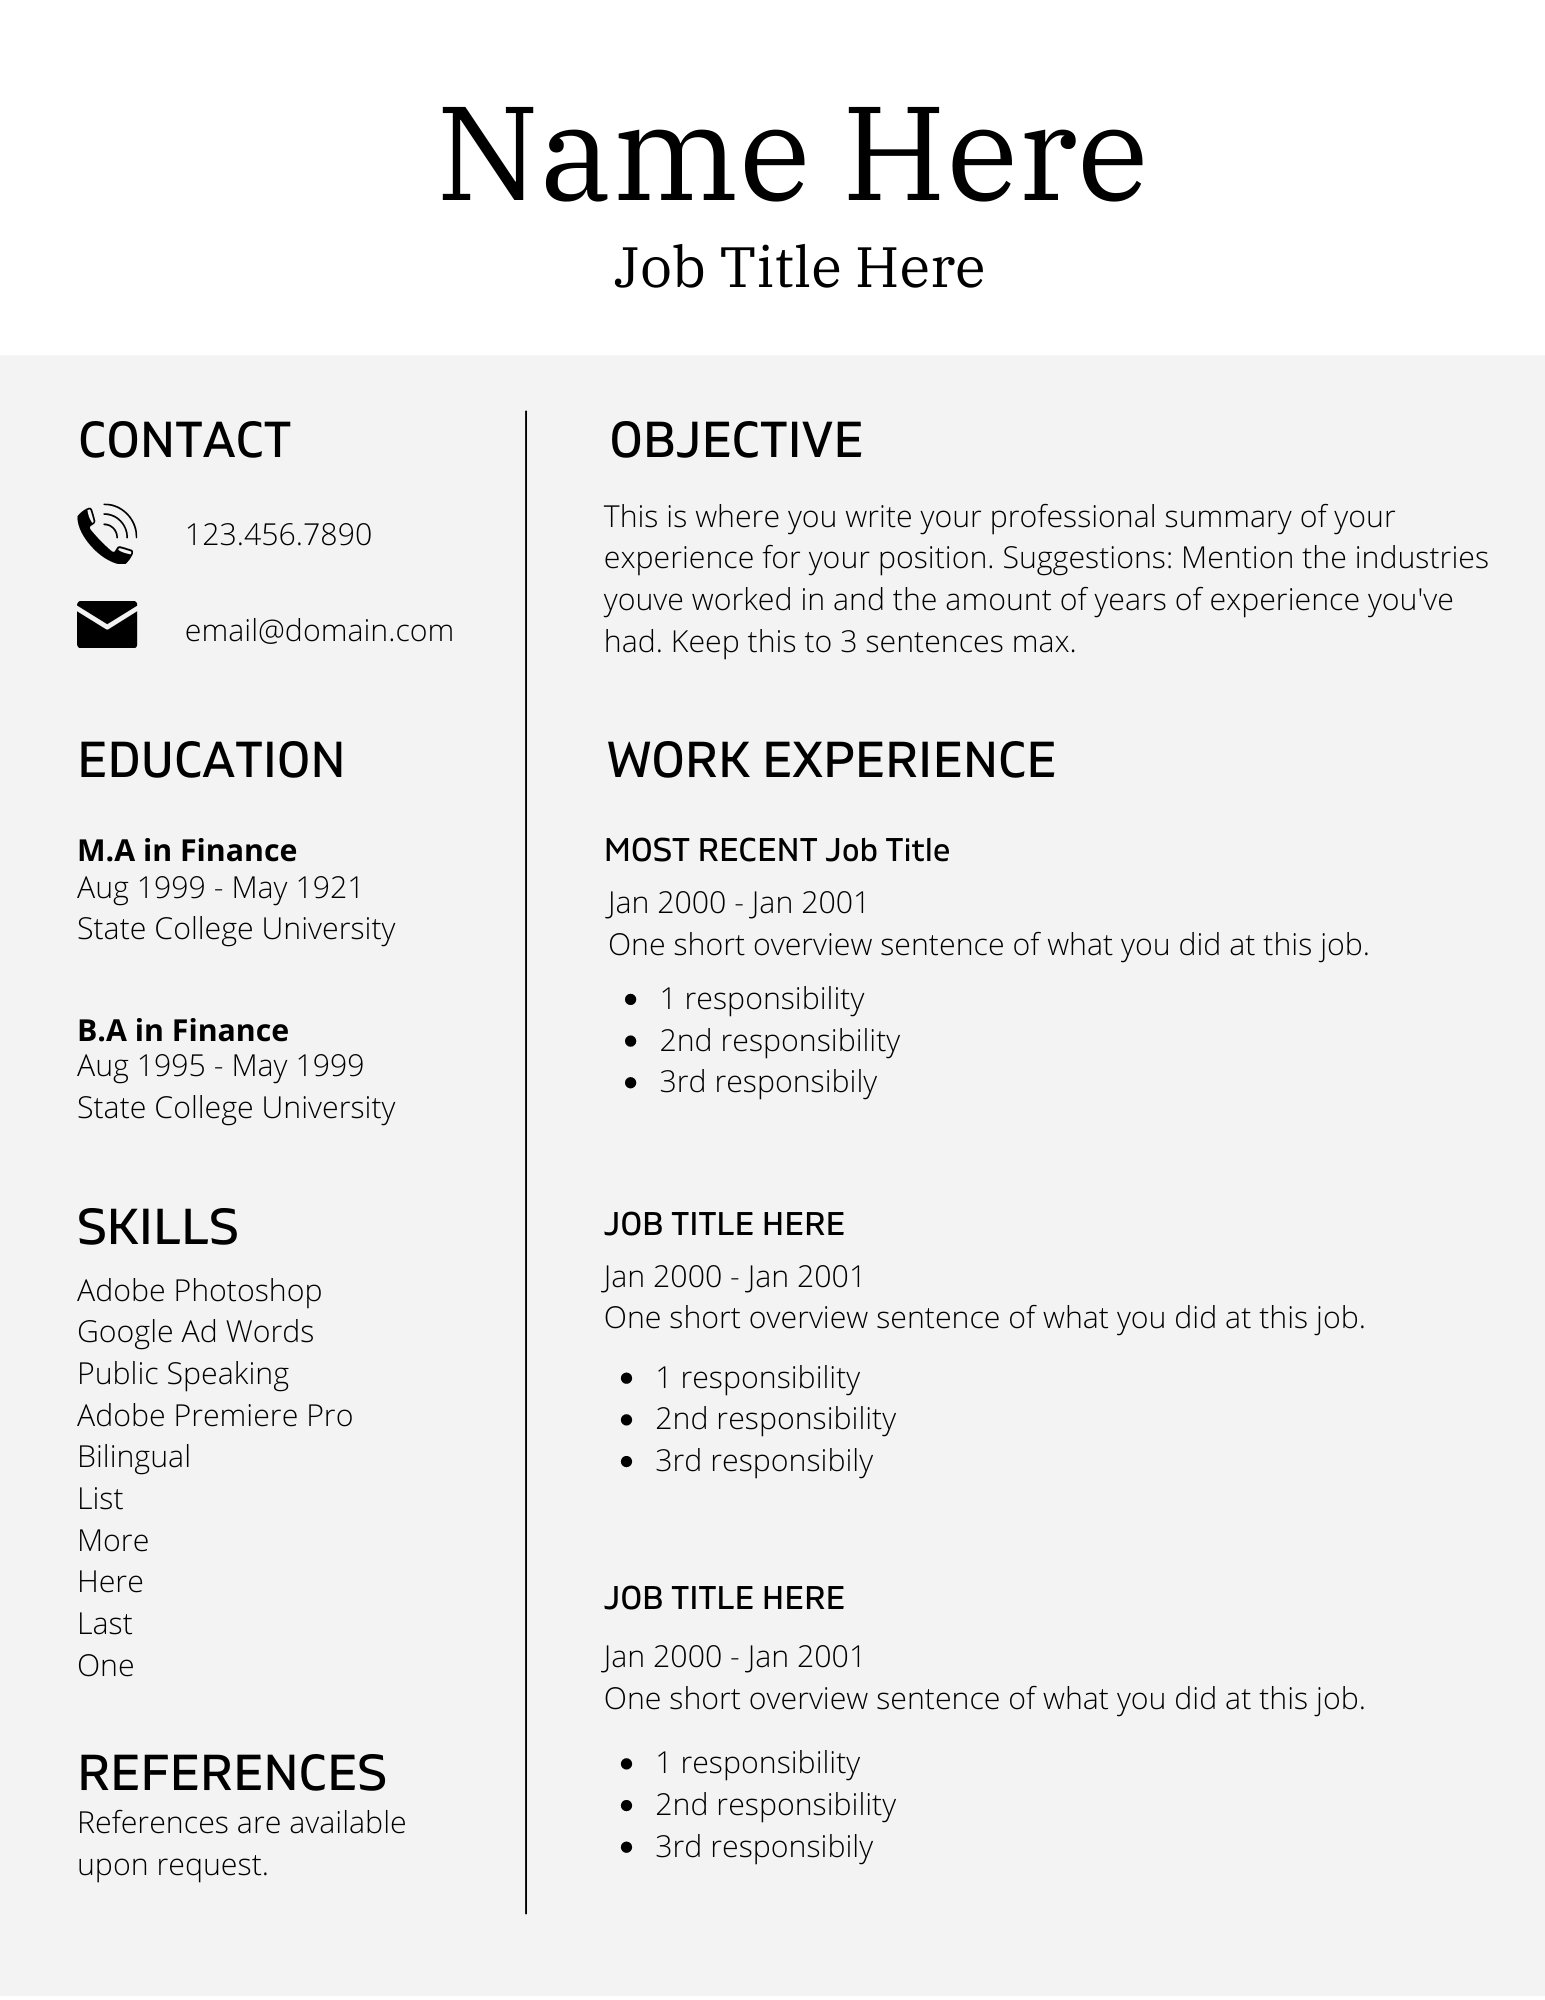 how to create resume for job interview